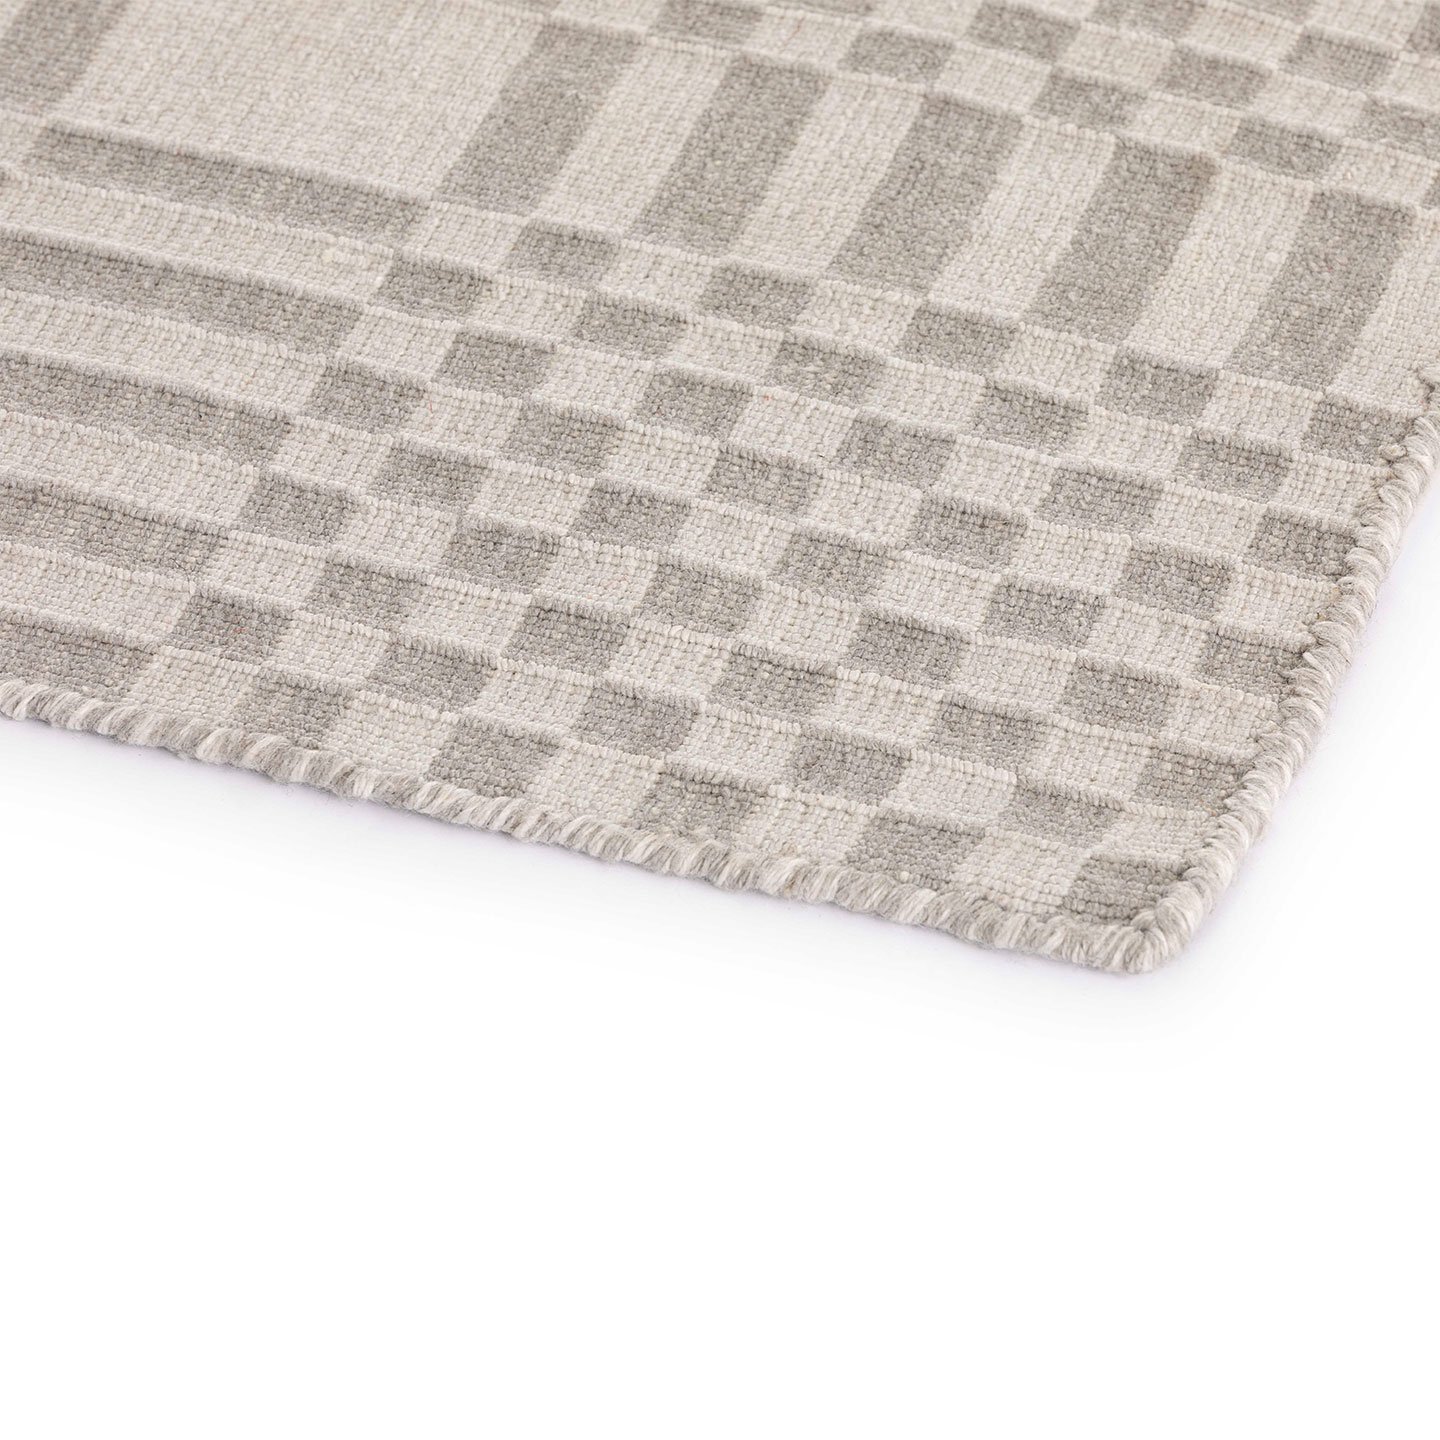 Haworth Patch Rug in grey and white with square pattern